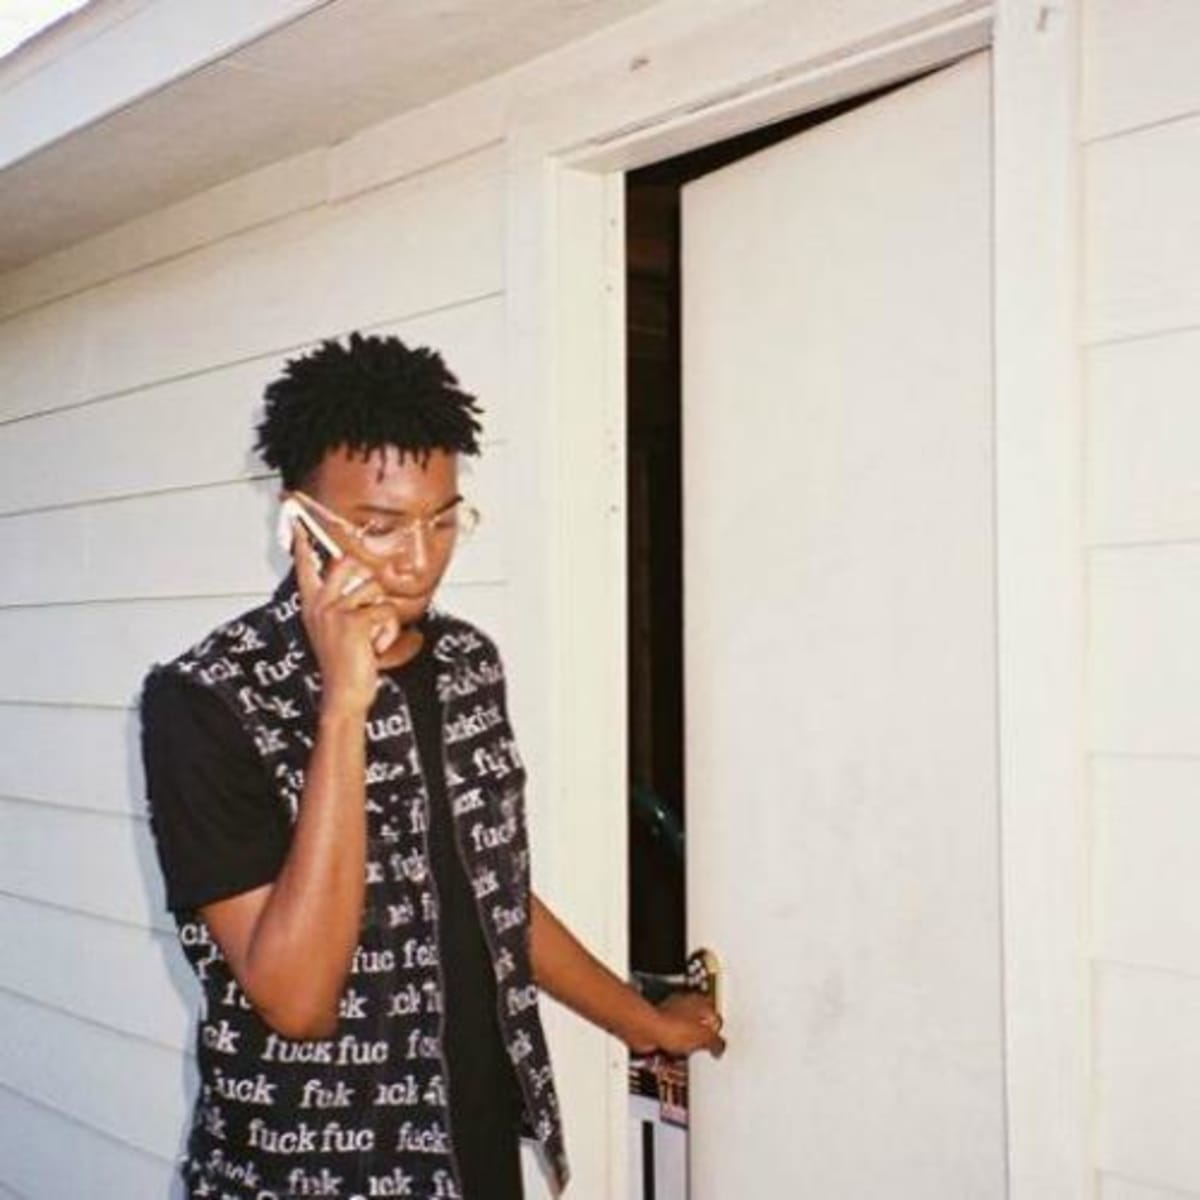 Premiere: Hear Two New Songs From Playboi Carti, 